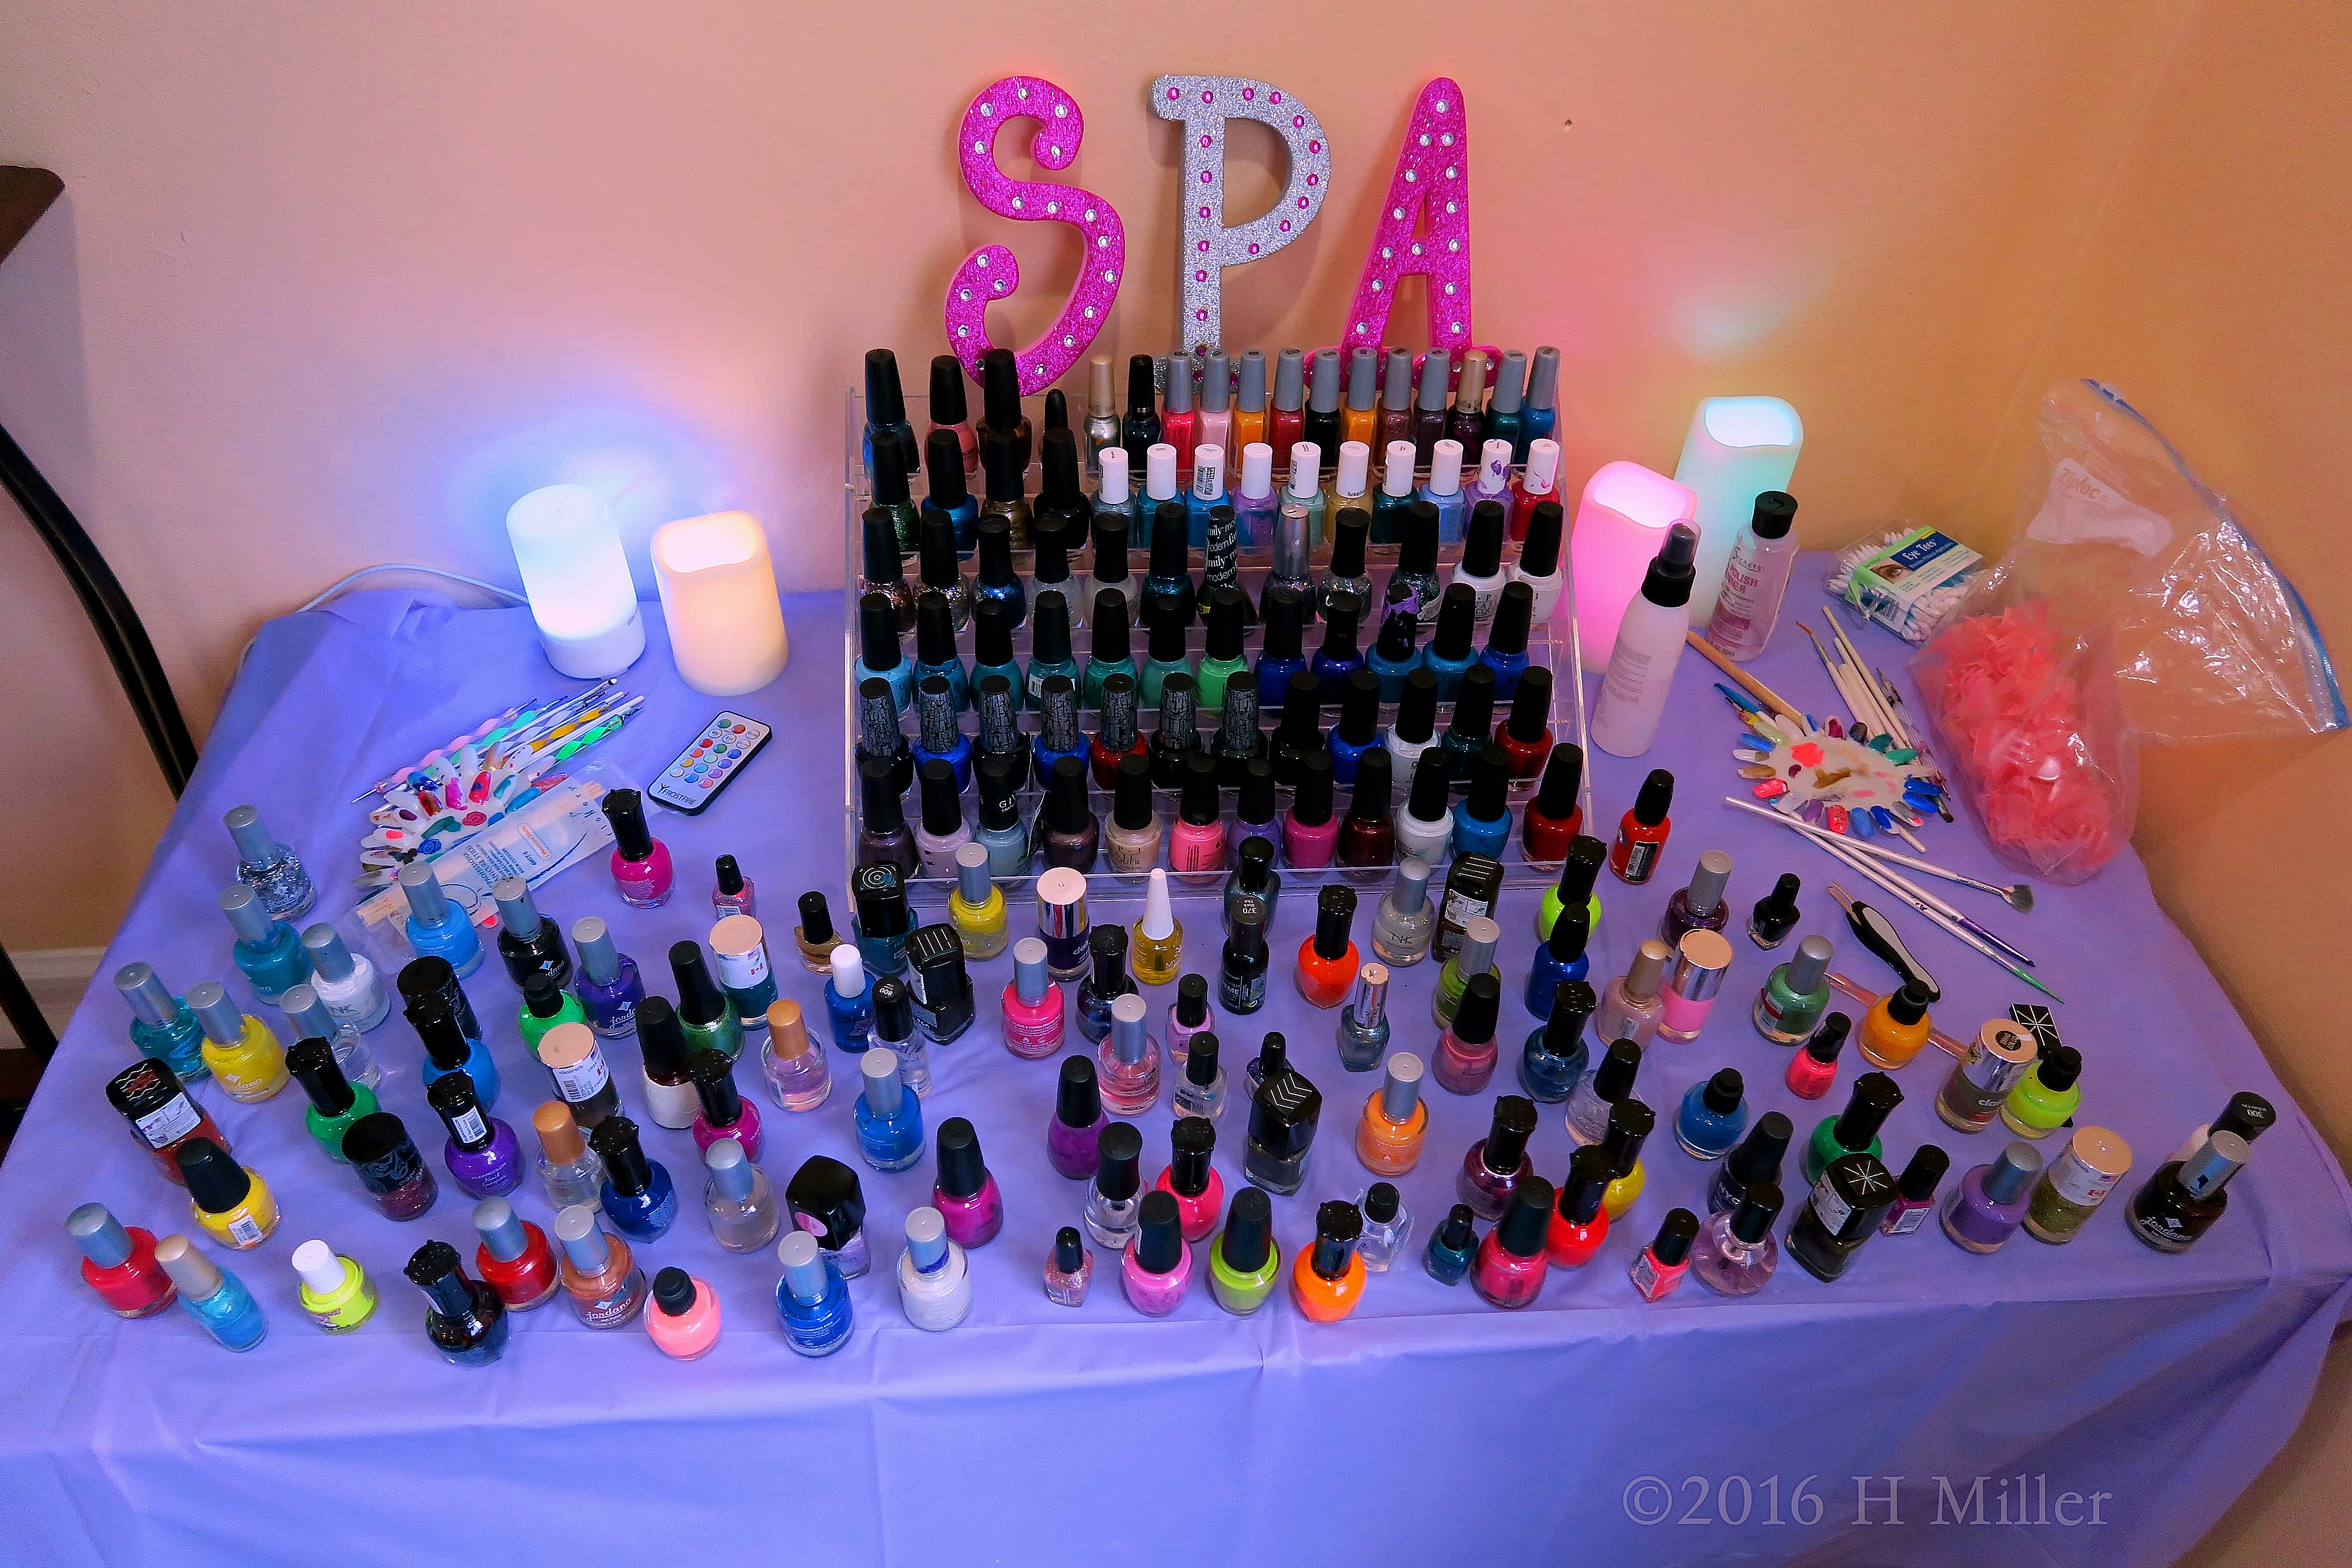 Look At All The Nail Polish At The Kids Manicure Station! 